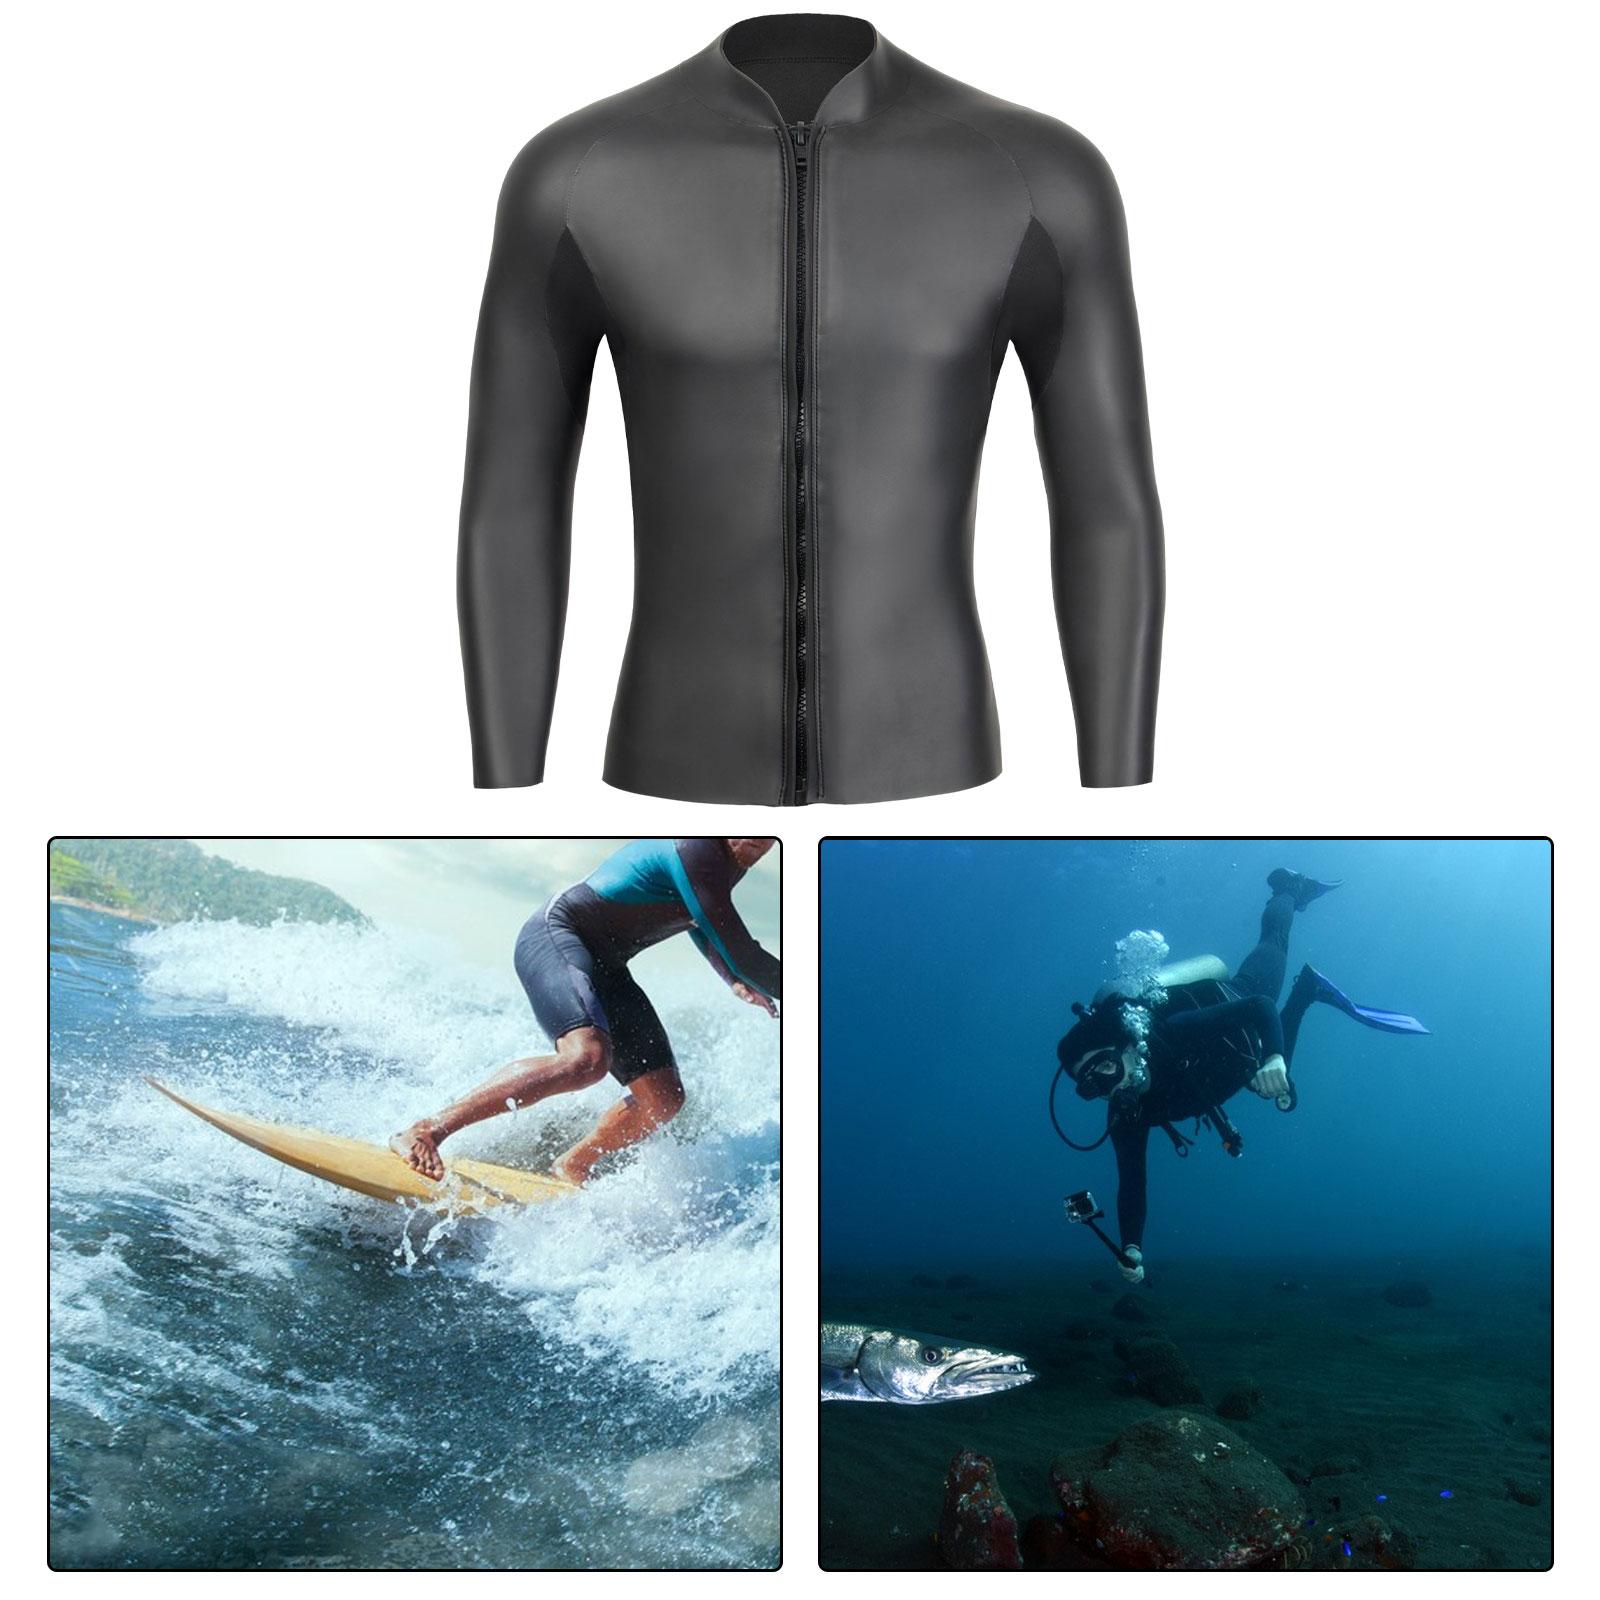 Wetsuit Top 3mm with Zipper Diving Suit for Underwater Kayaking Water Sports L